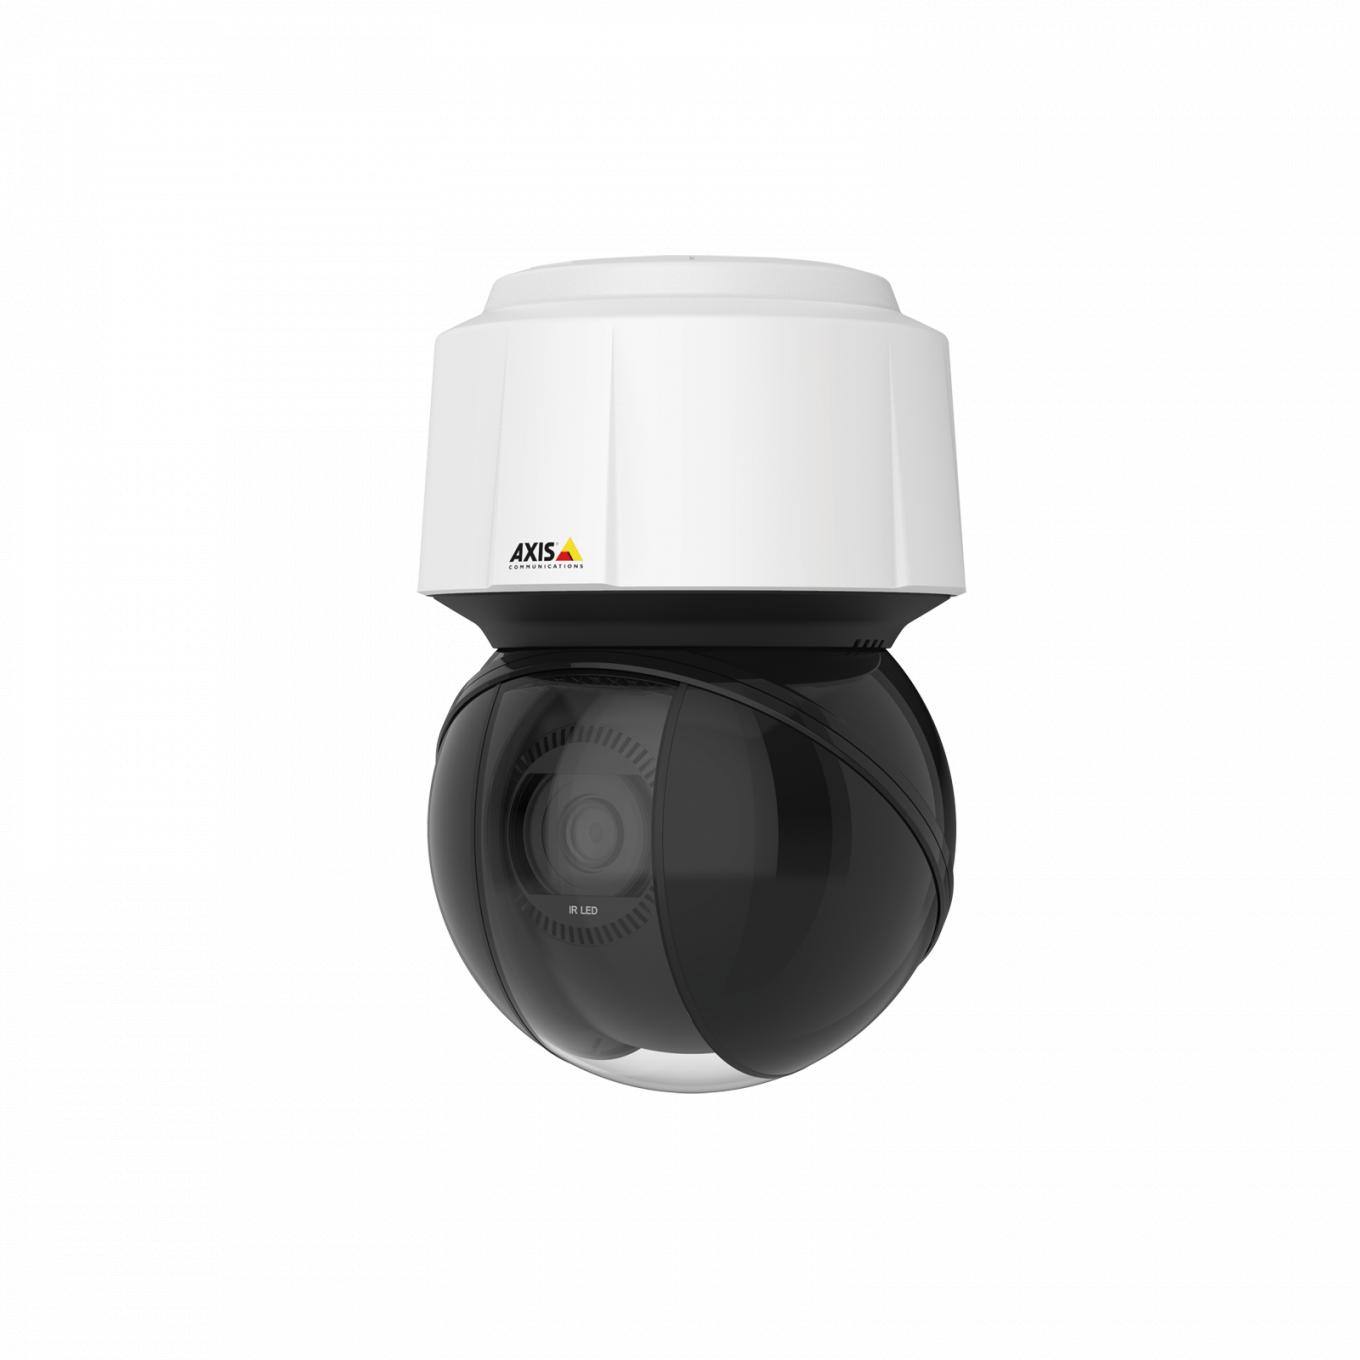 AXIS Q6135-LE PTZ Camera from left angle